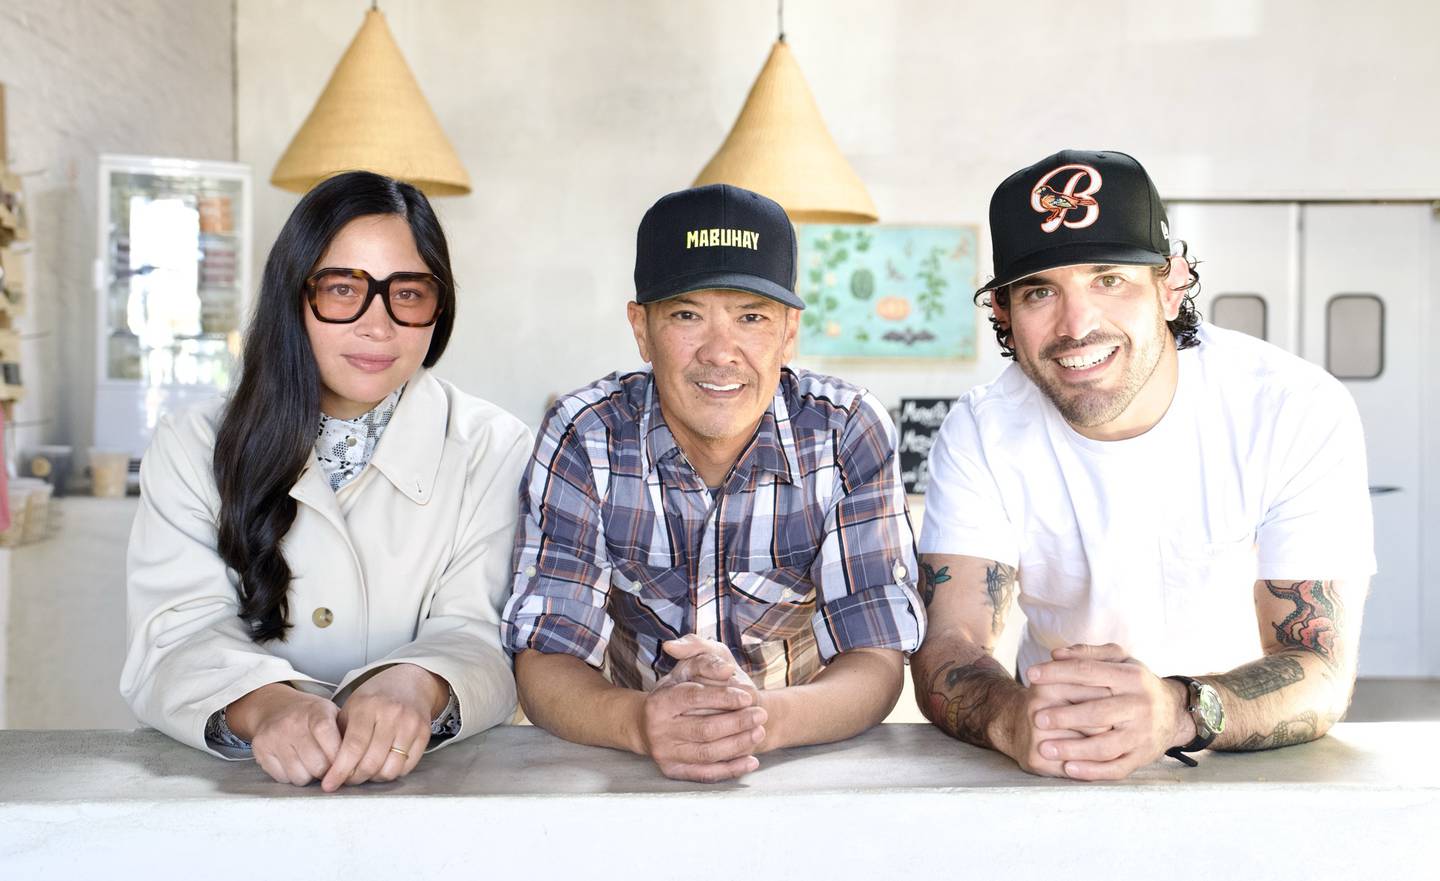 A Filipino/Mexican popup will take place on Wednesday at Clavel between Lane Harlan, Carlos Raba and Rey Eugenio.